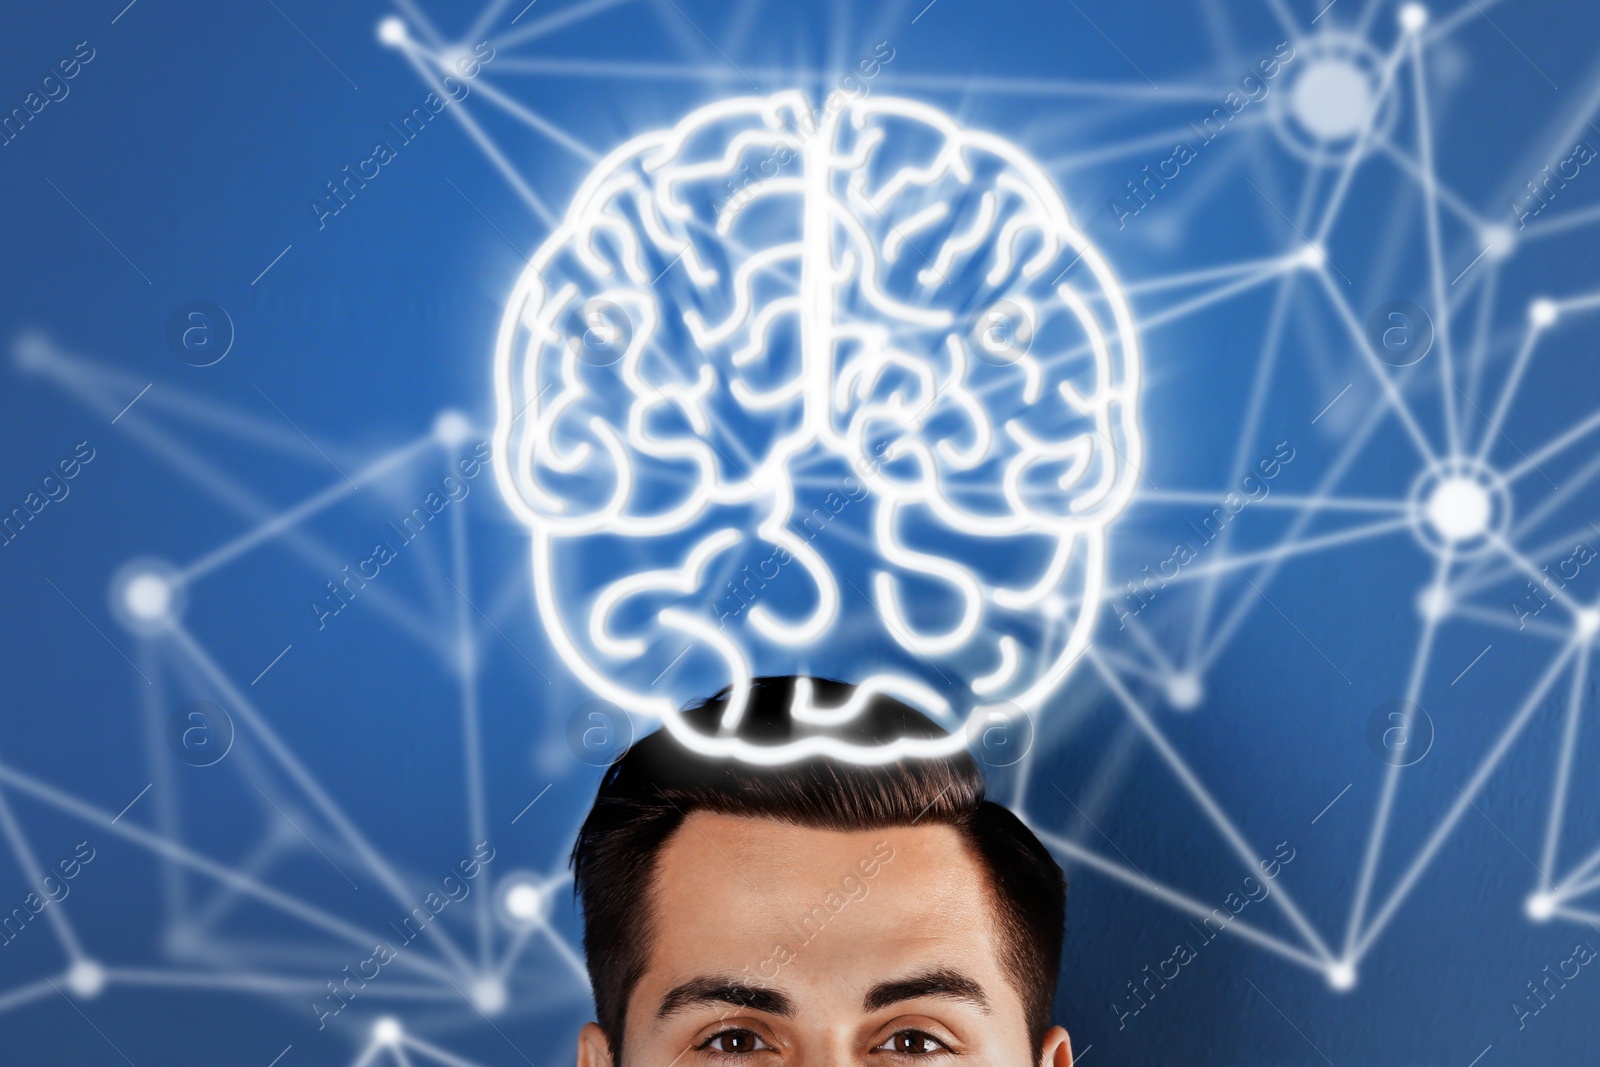 Image of Memory. Man with illustration of brain over his head against blue background with scheme